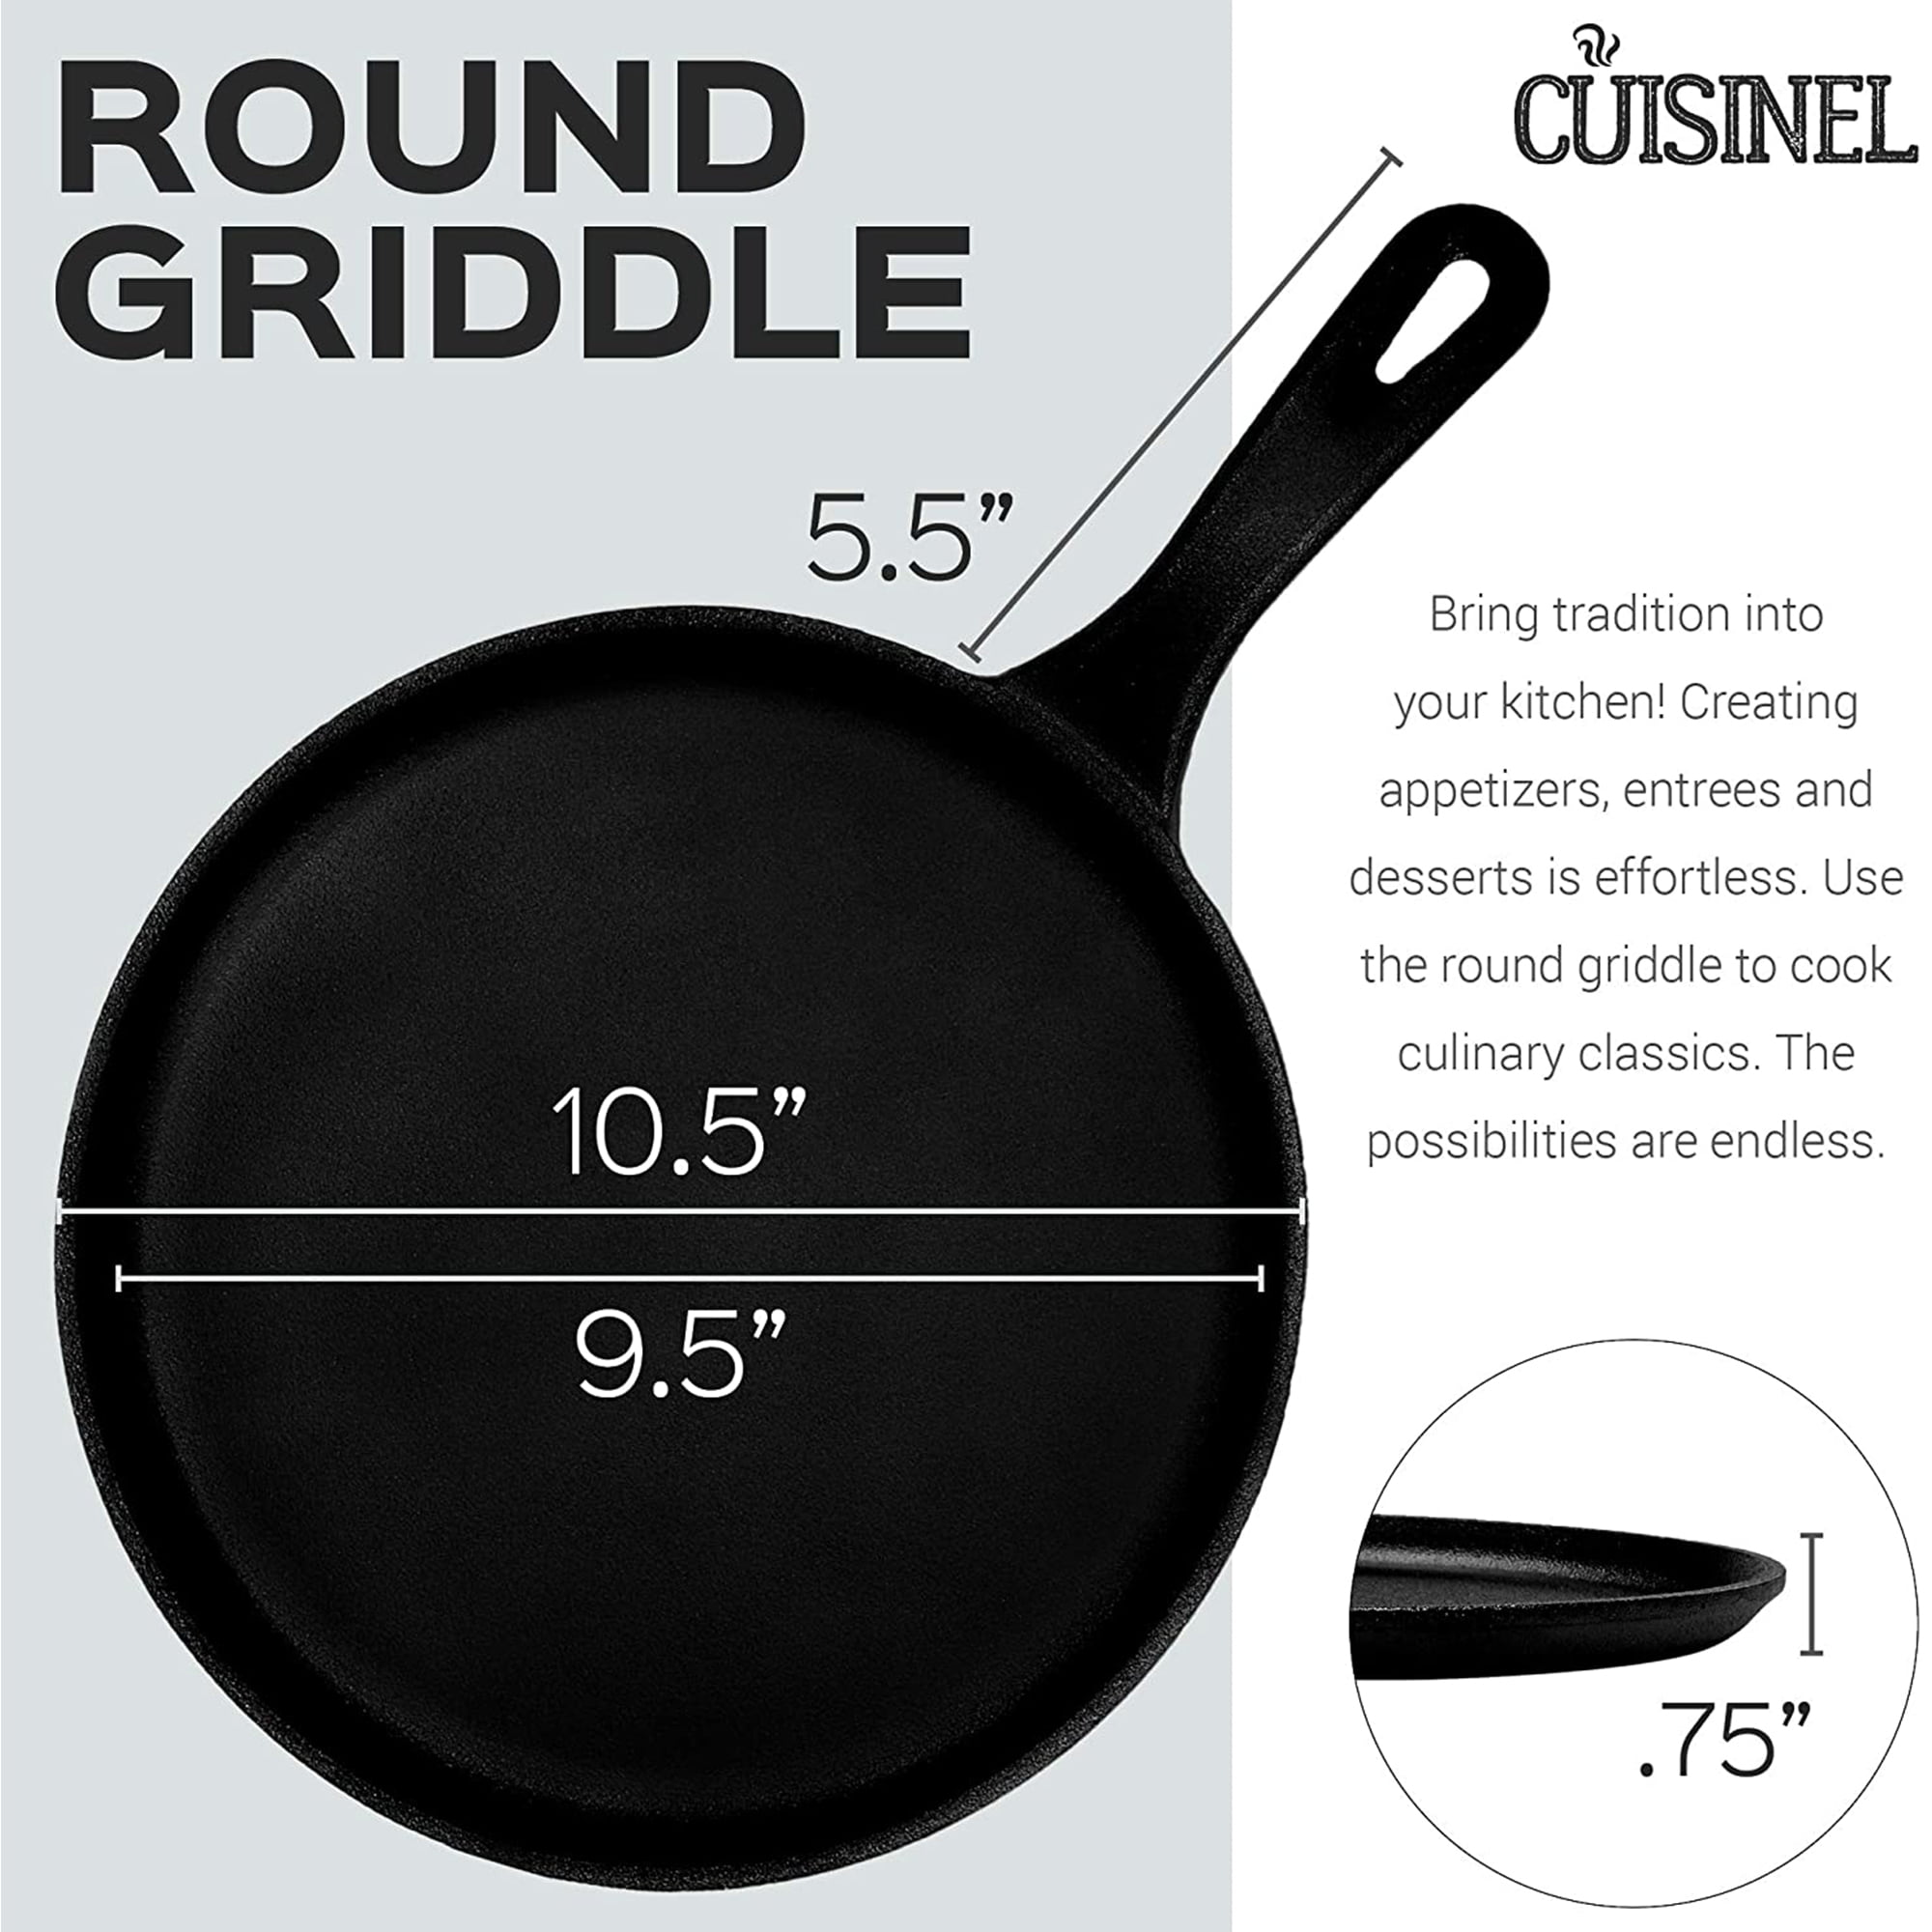  Cuisinel Cast Iron Lid - Fits 10-Inch Lodge Skillet Frying  Pans or Braiser + Silicone Handle Holder + Care Guide - 25.4-cm  Pre-Seasoned Universal Replacement Cover - Indoor/Outdoor, Fire, BBQ Safe